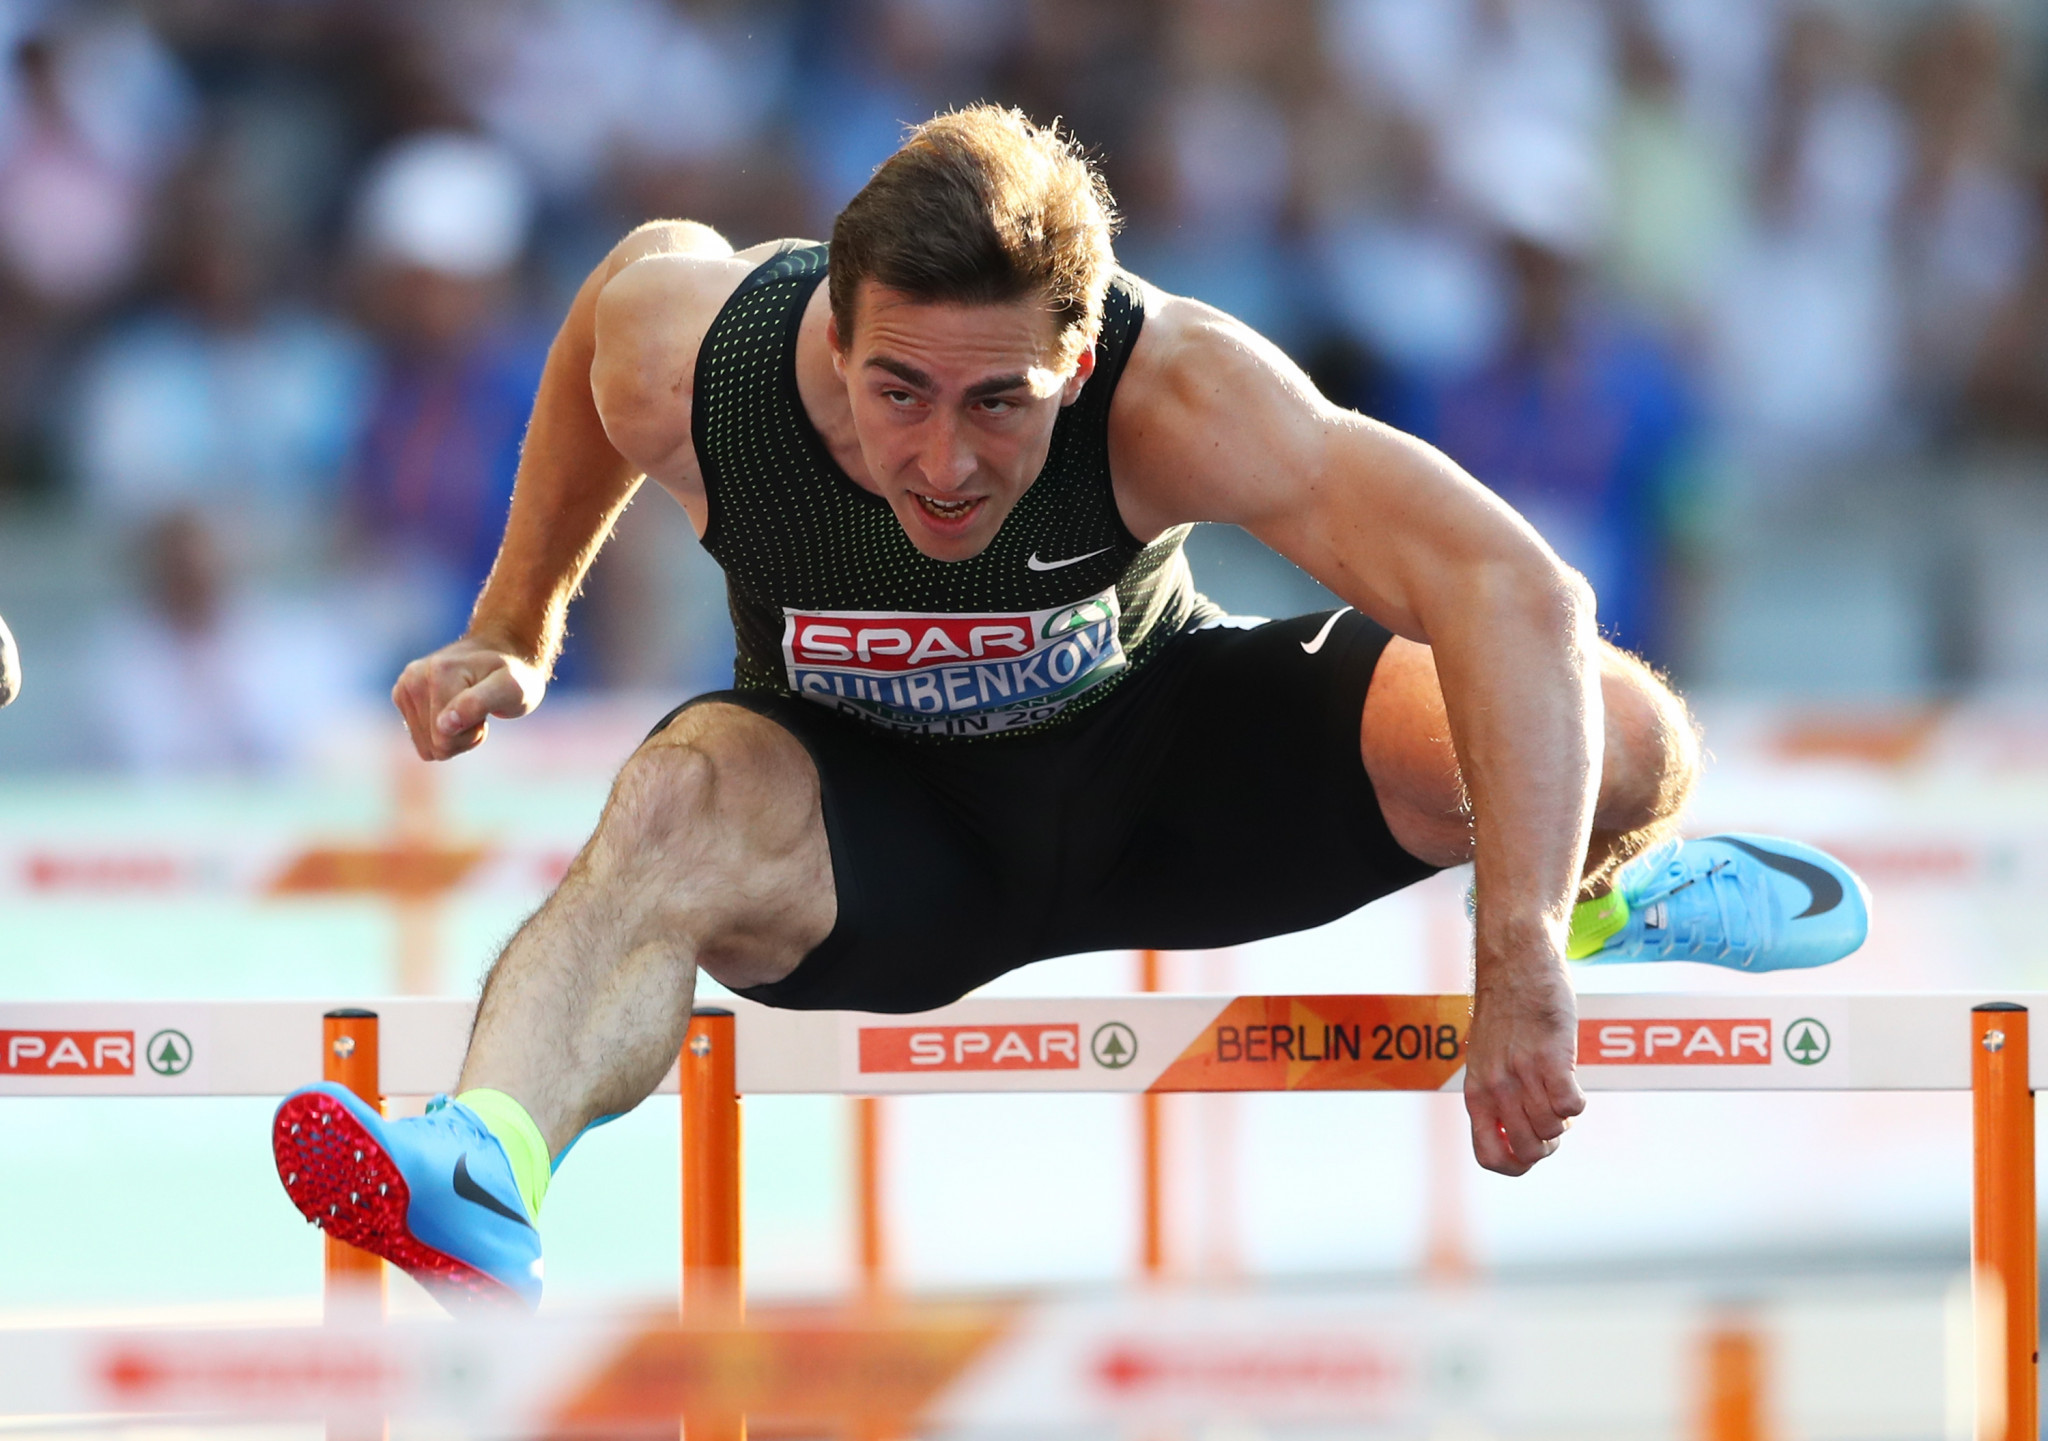 Russian competitors, like 110 metres hurdler Sergey Shubenkov, have been forced to compete as an 